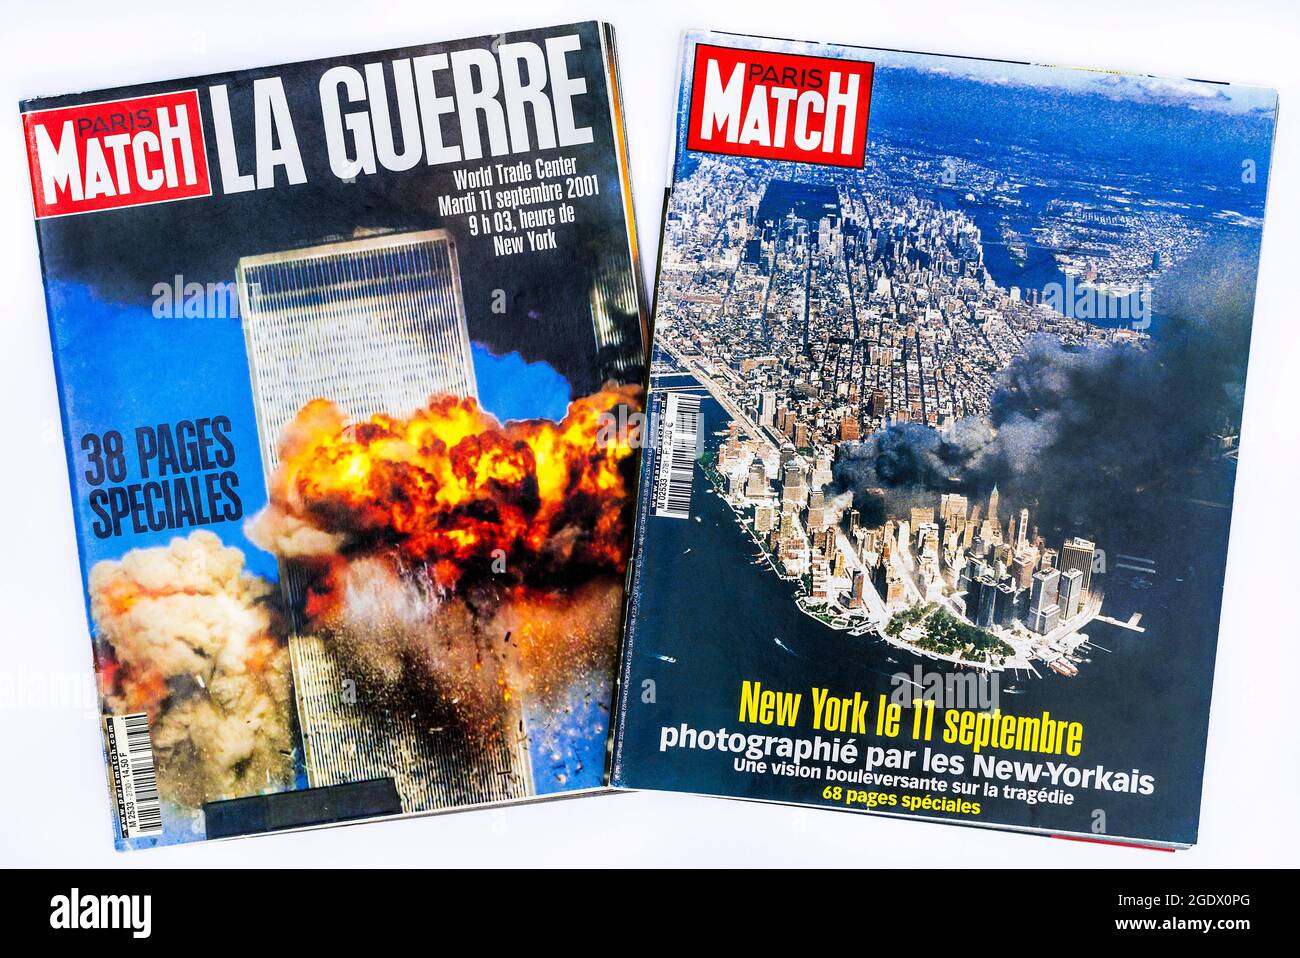 French 'Paris Match' magazine covers reporting the 9/11 terror attack on the World Trade Center, New York, USA on September 11, 2001. Stock Photo